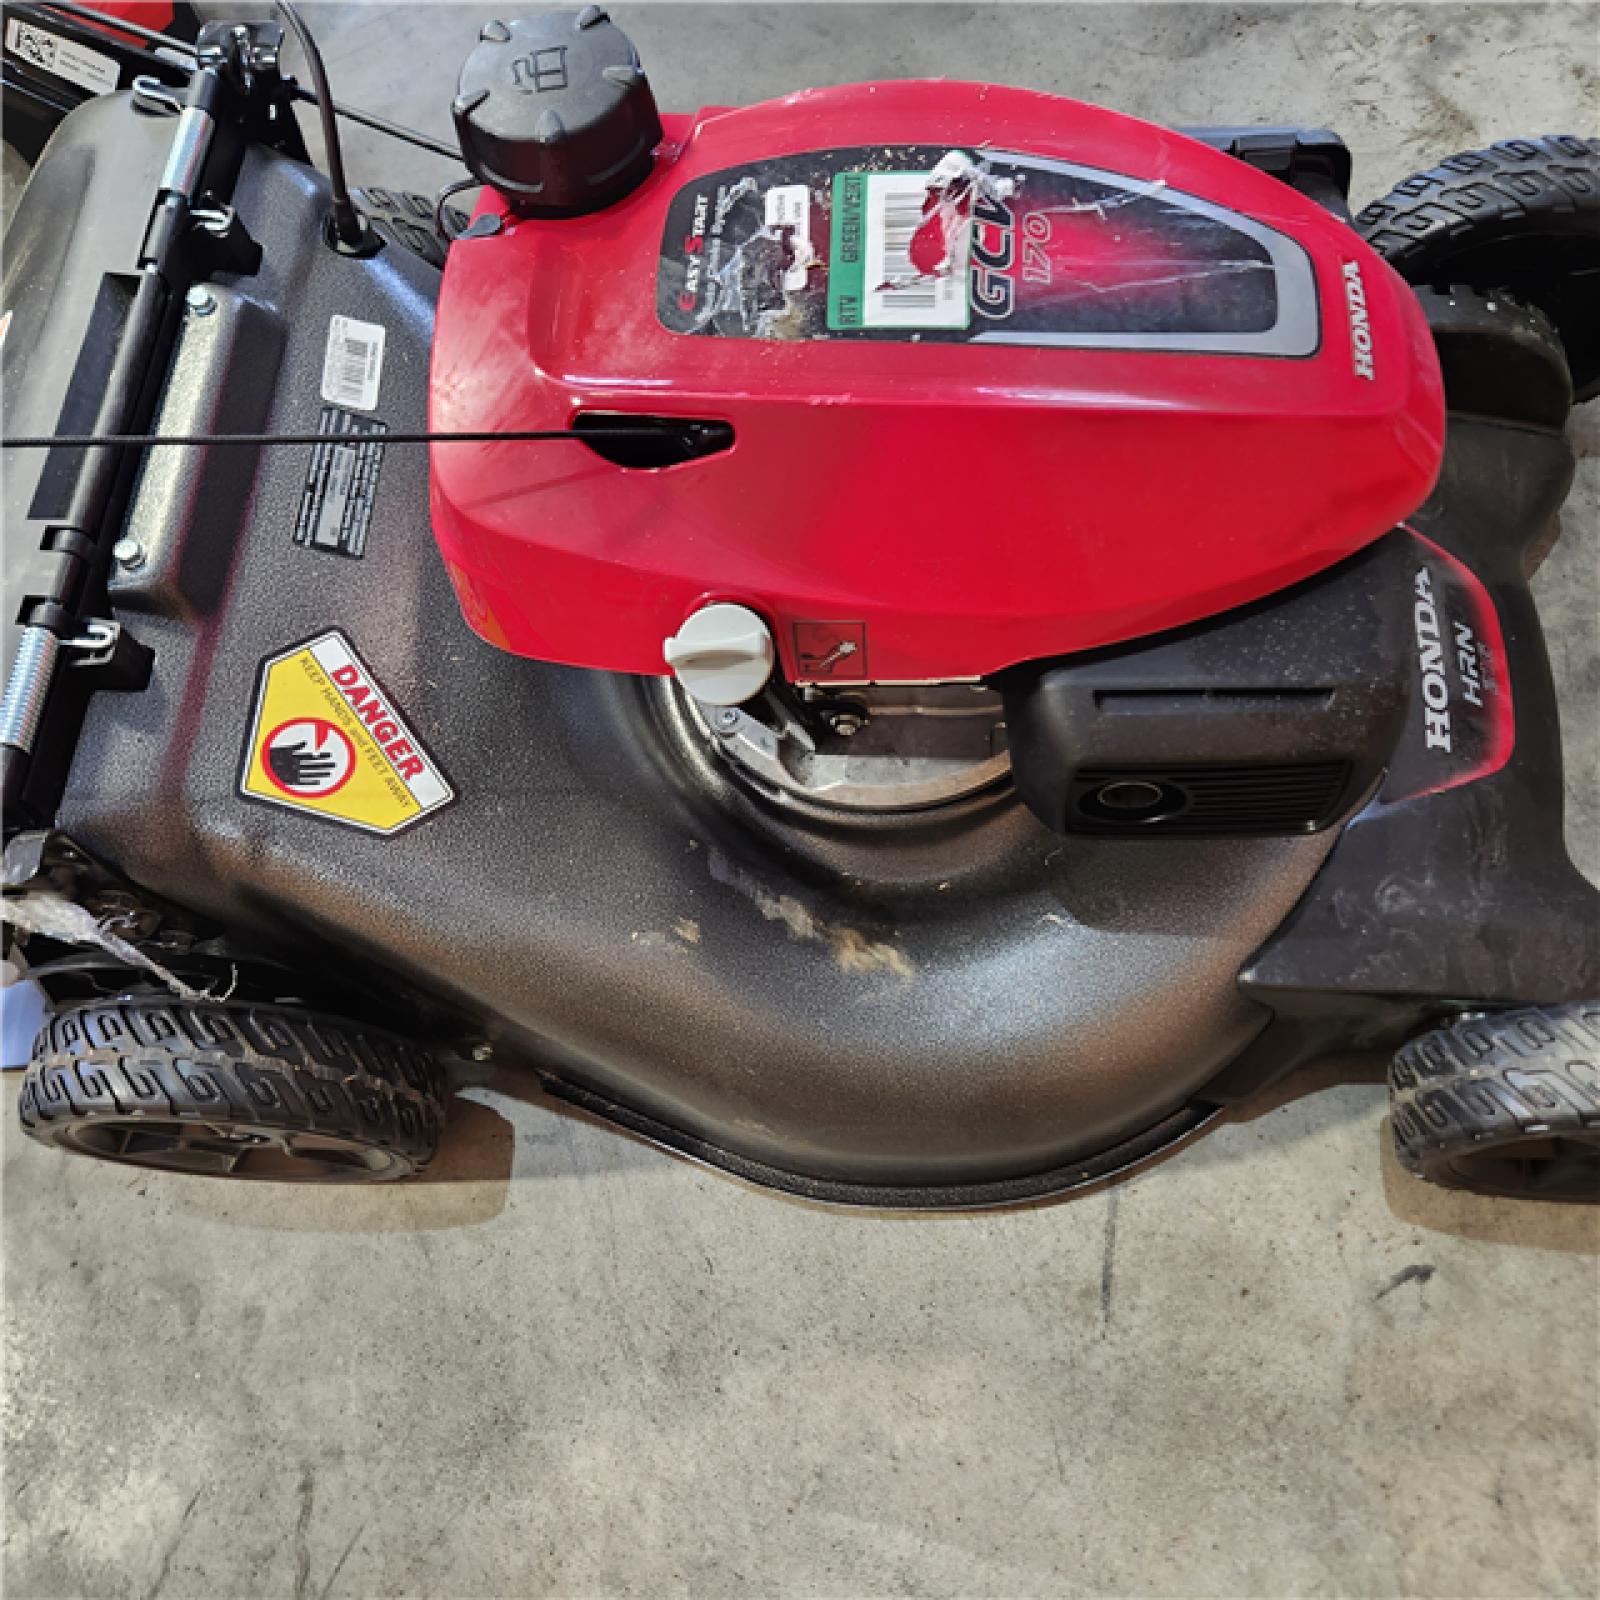 Houston Location - As-Is Honda 21 in. 3-in-1 Variable Speed Gas Walk Behind Self-Propelled Lawn Mower with Auto Choke - Appears IN GOOD Condition